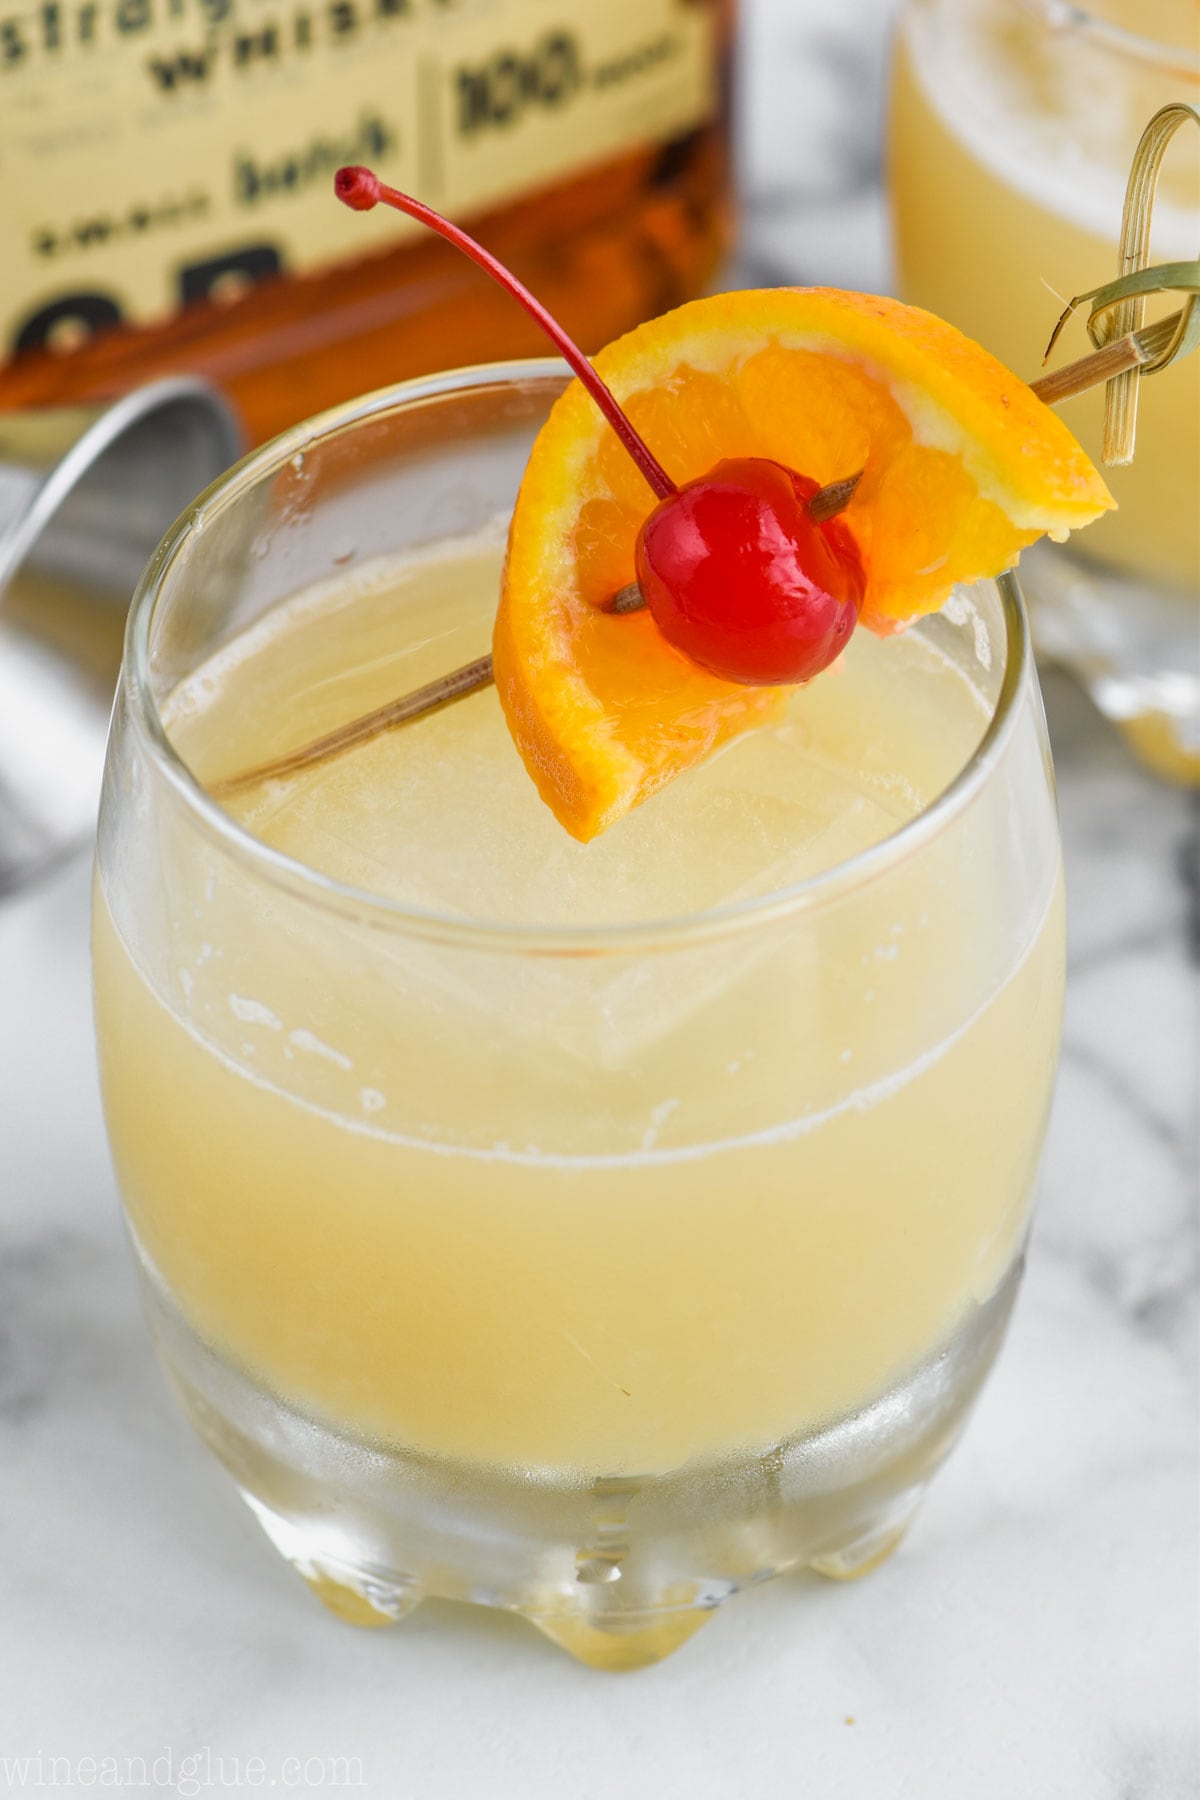 whiskey_sour_recipe_image - Shake Drink Repeat